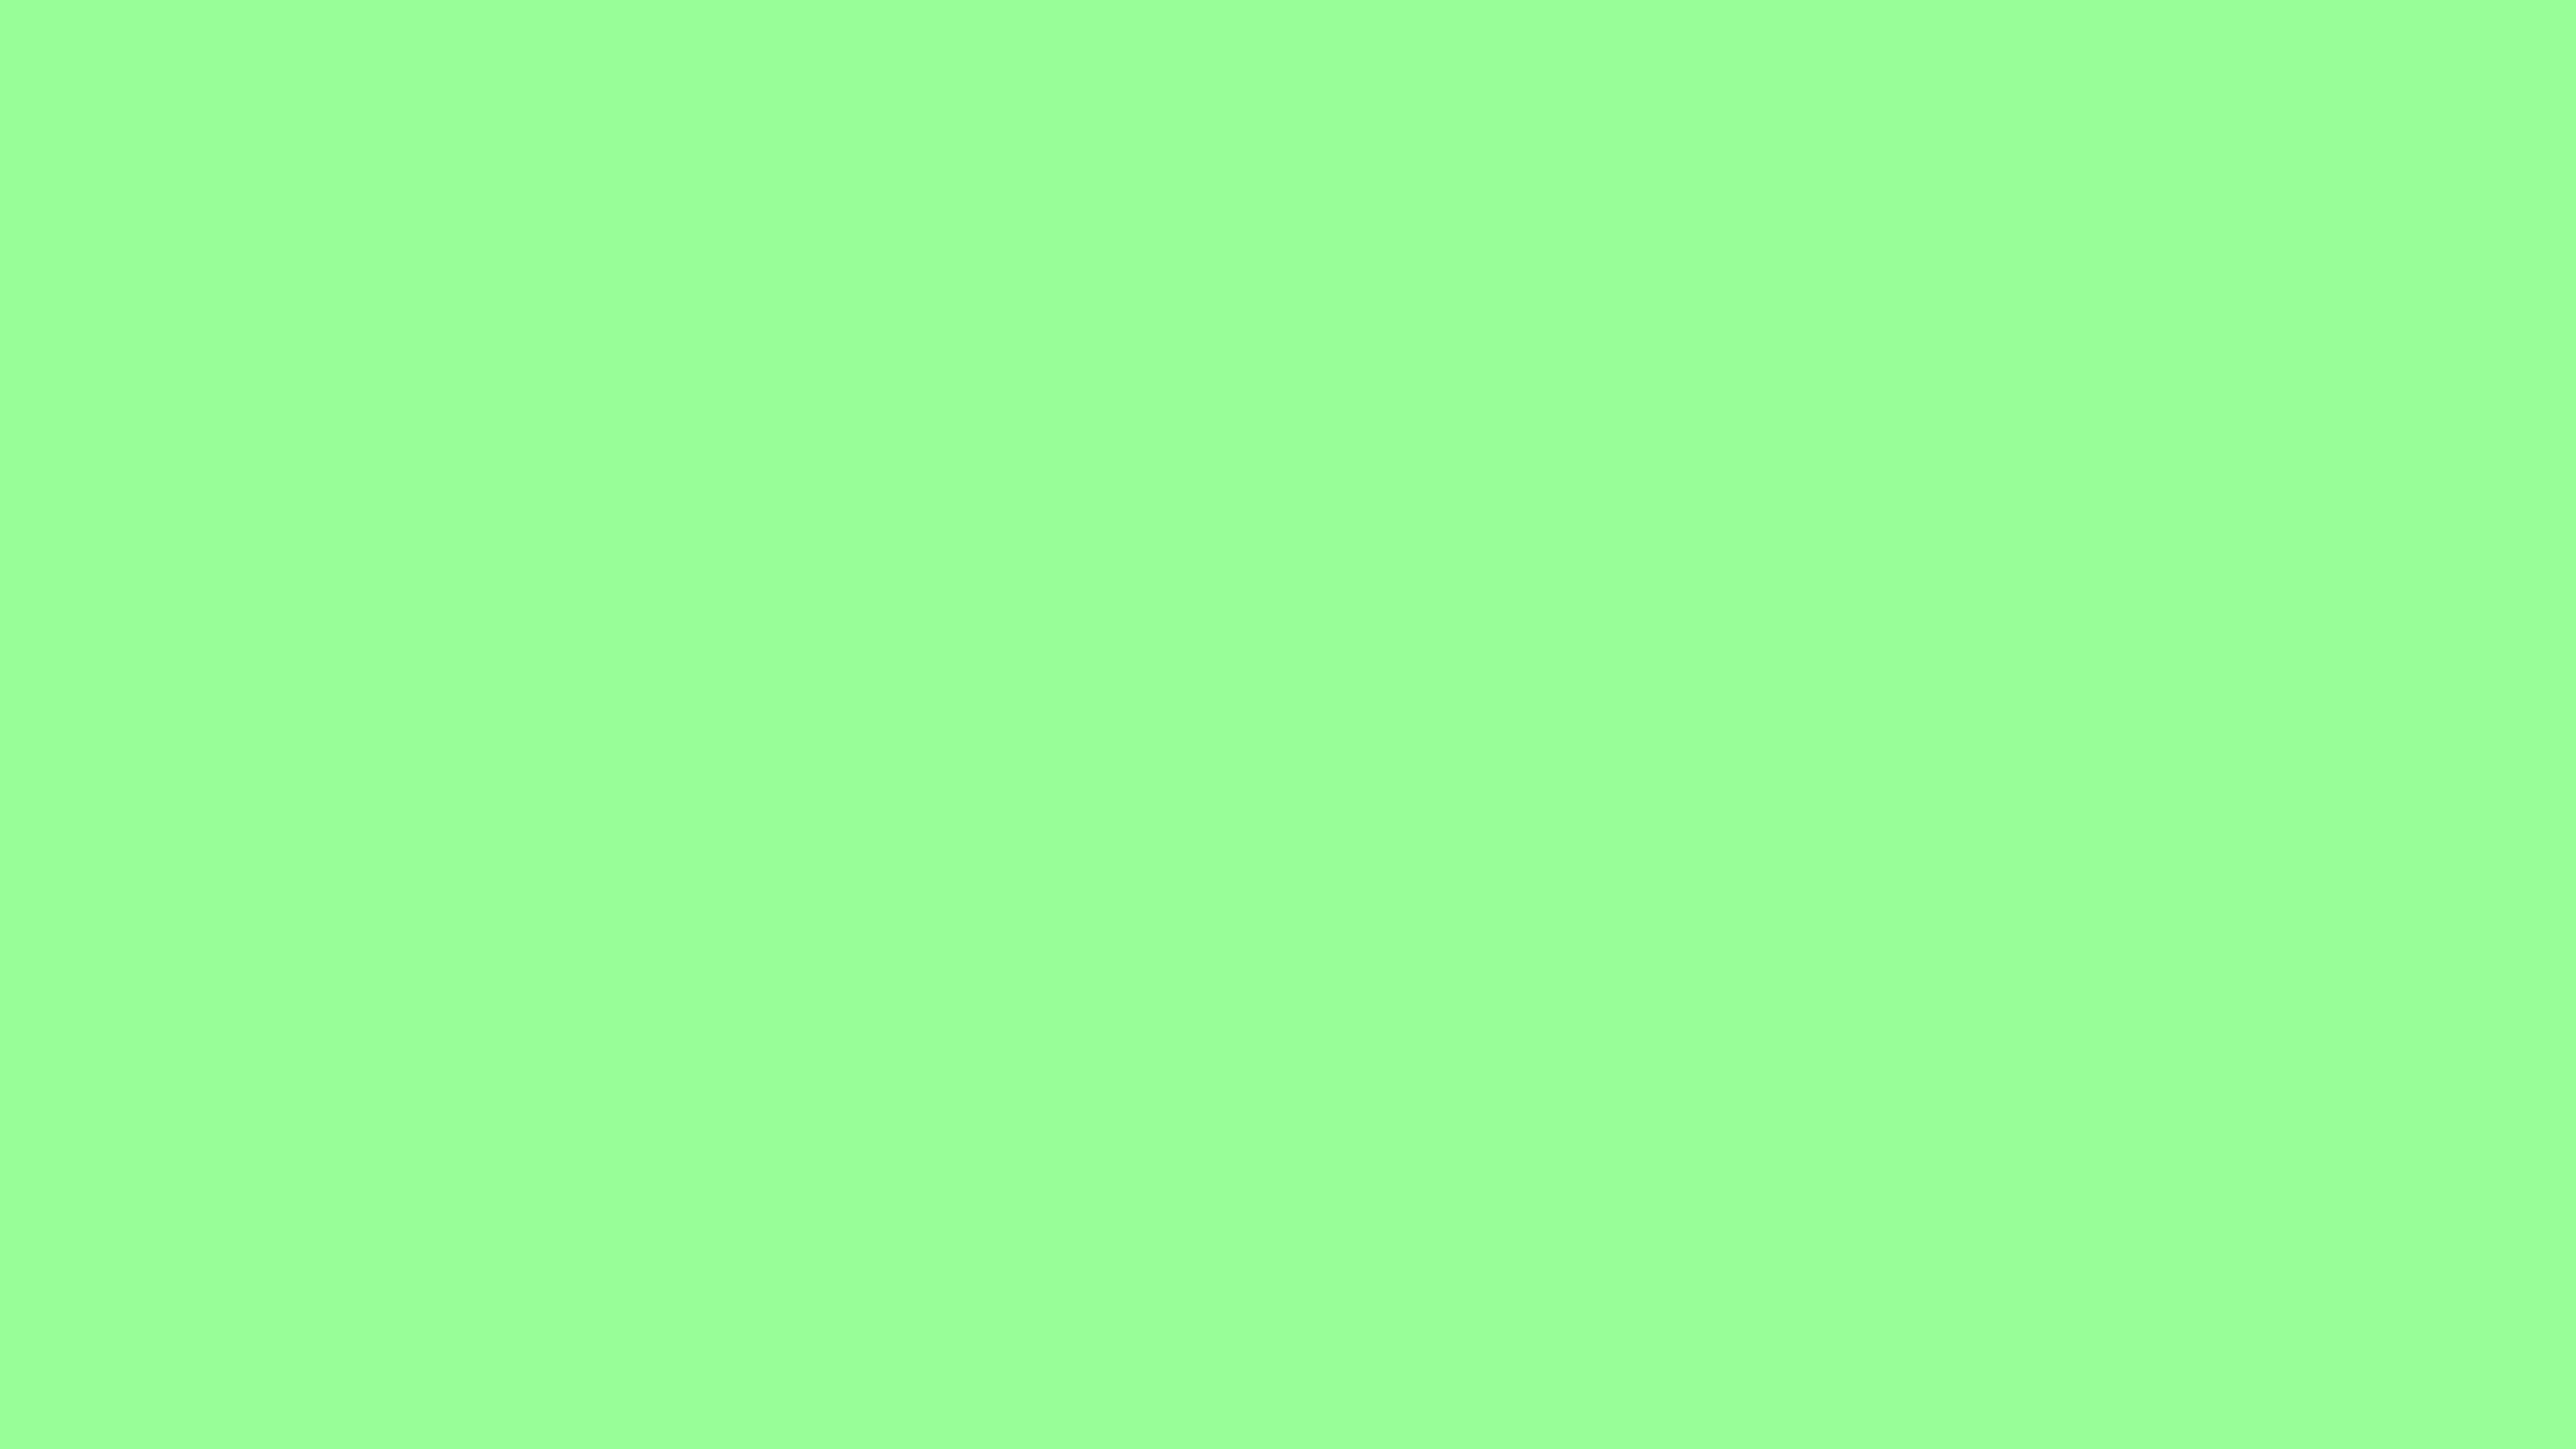 7680x4320 Mint Green Solid Color Background